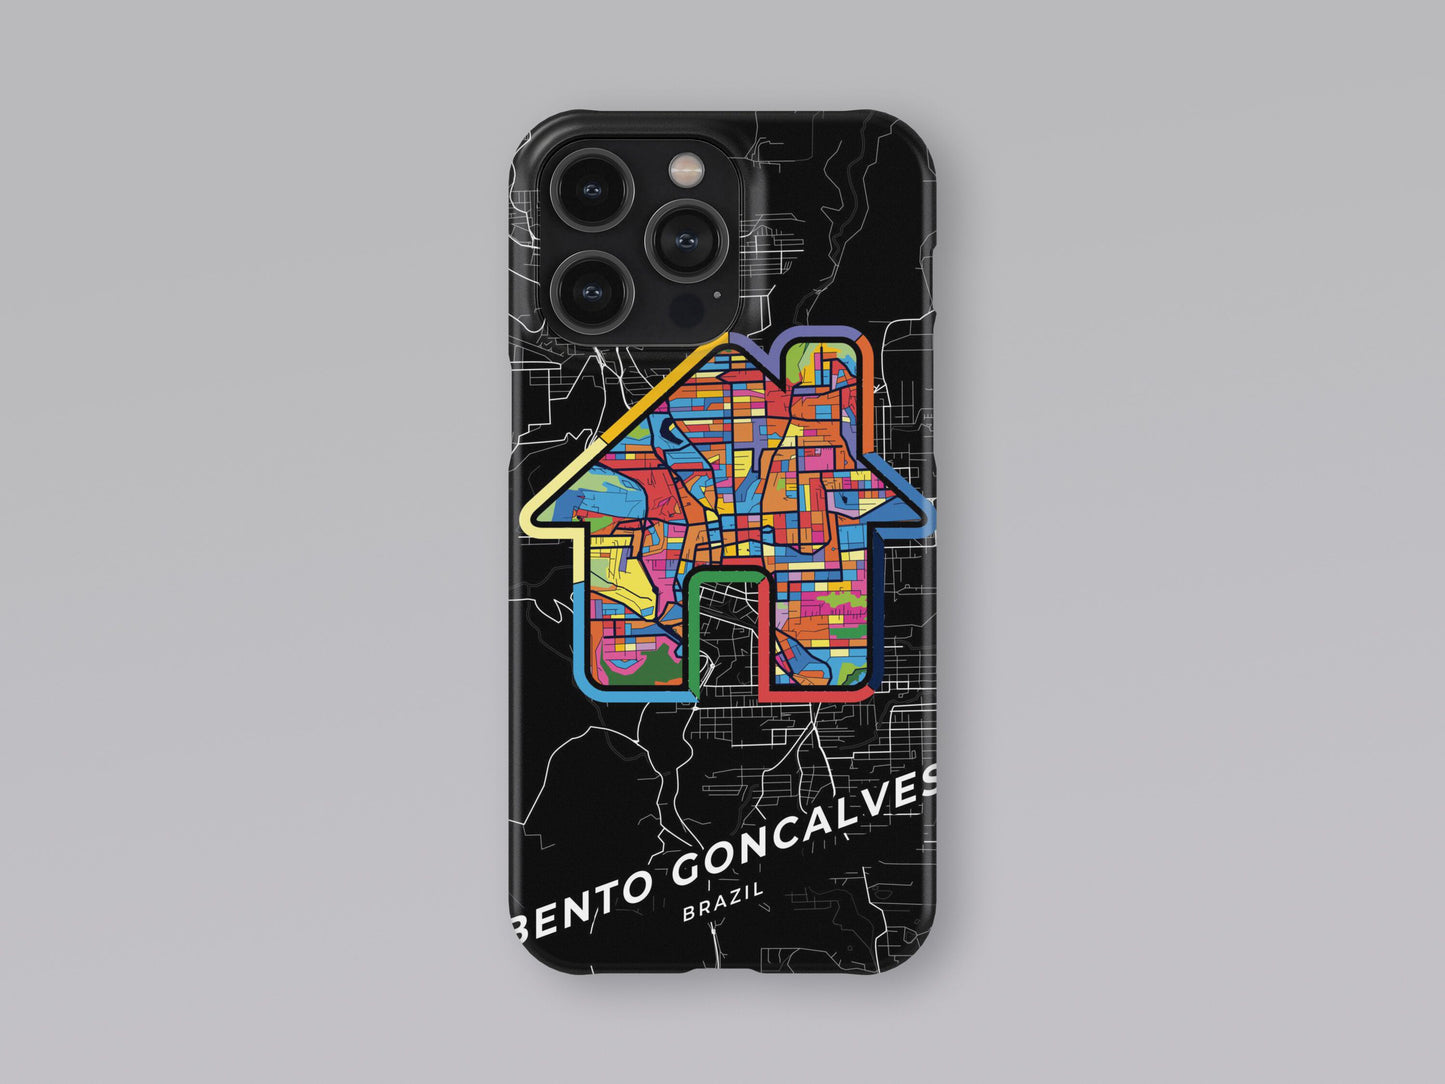 Bento Goncalves Brazil slim phone case with colorful icon. Birthday, wedding or housewarming gift. Couple match cases. 3